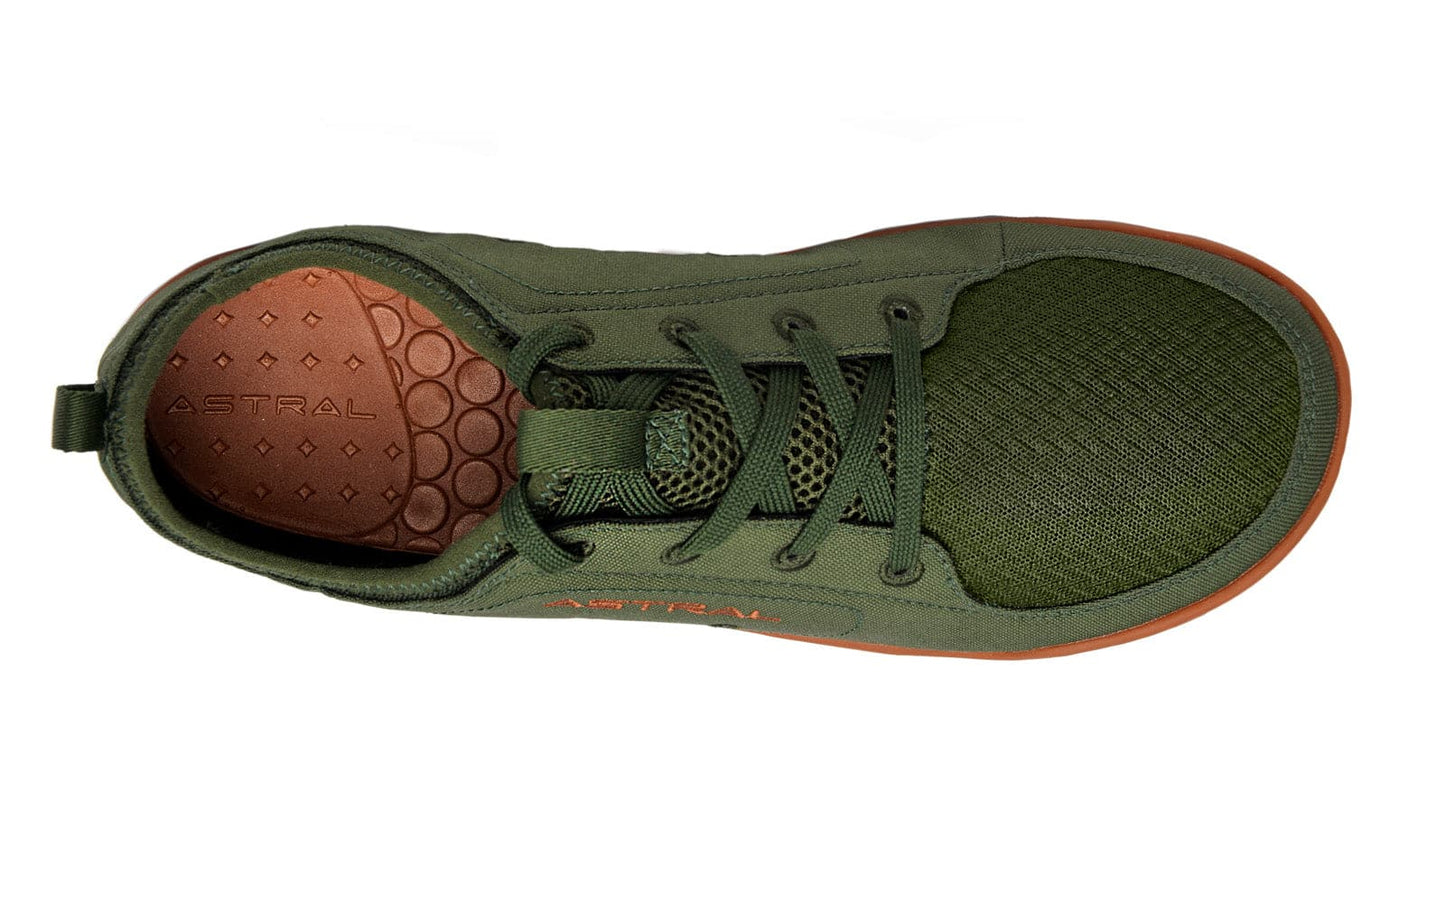 Featuring the Loyak - Men's men's footwear manufactured by Astral shown here from a sixth angle.